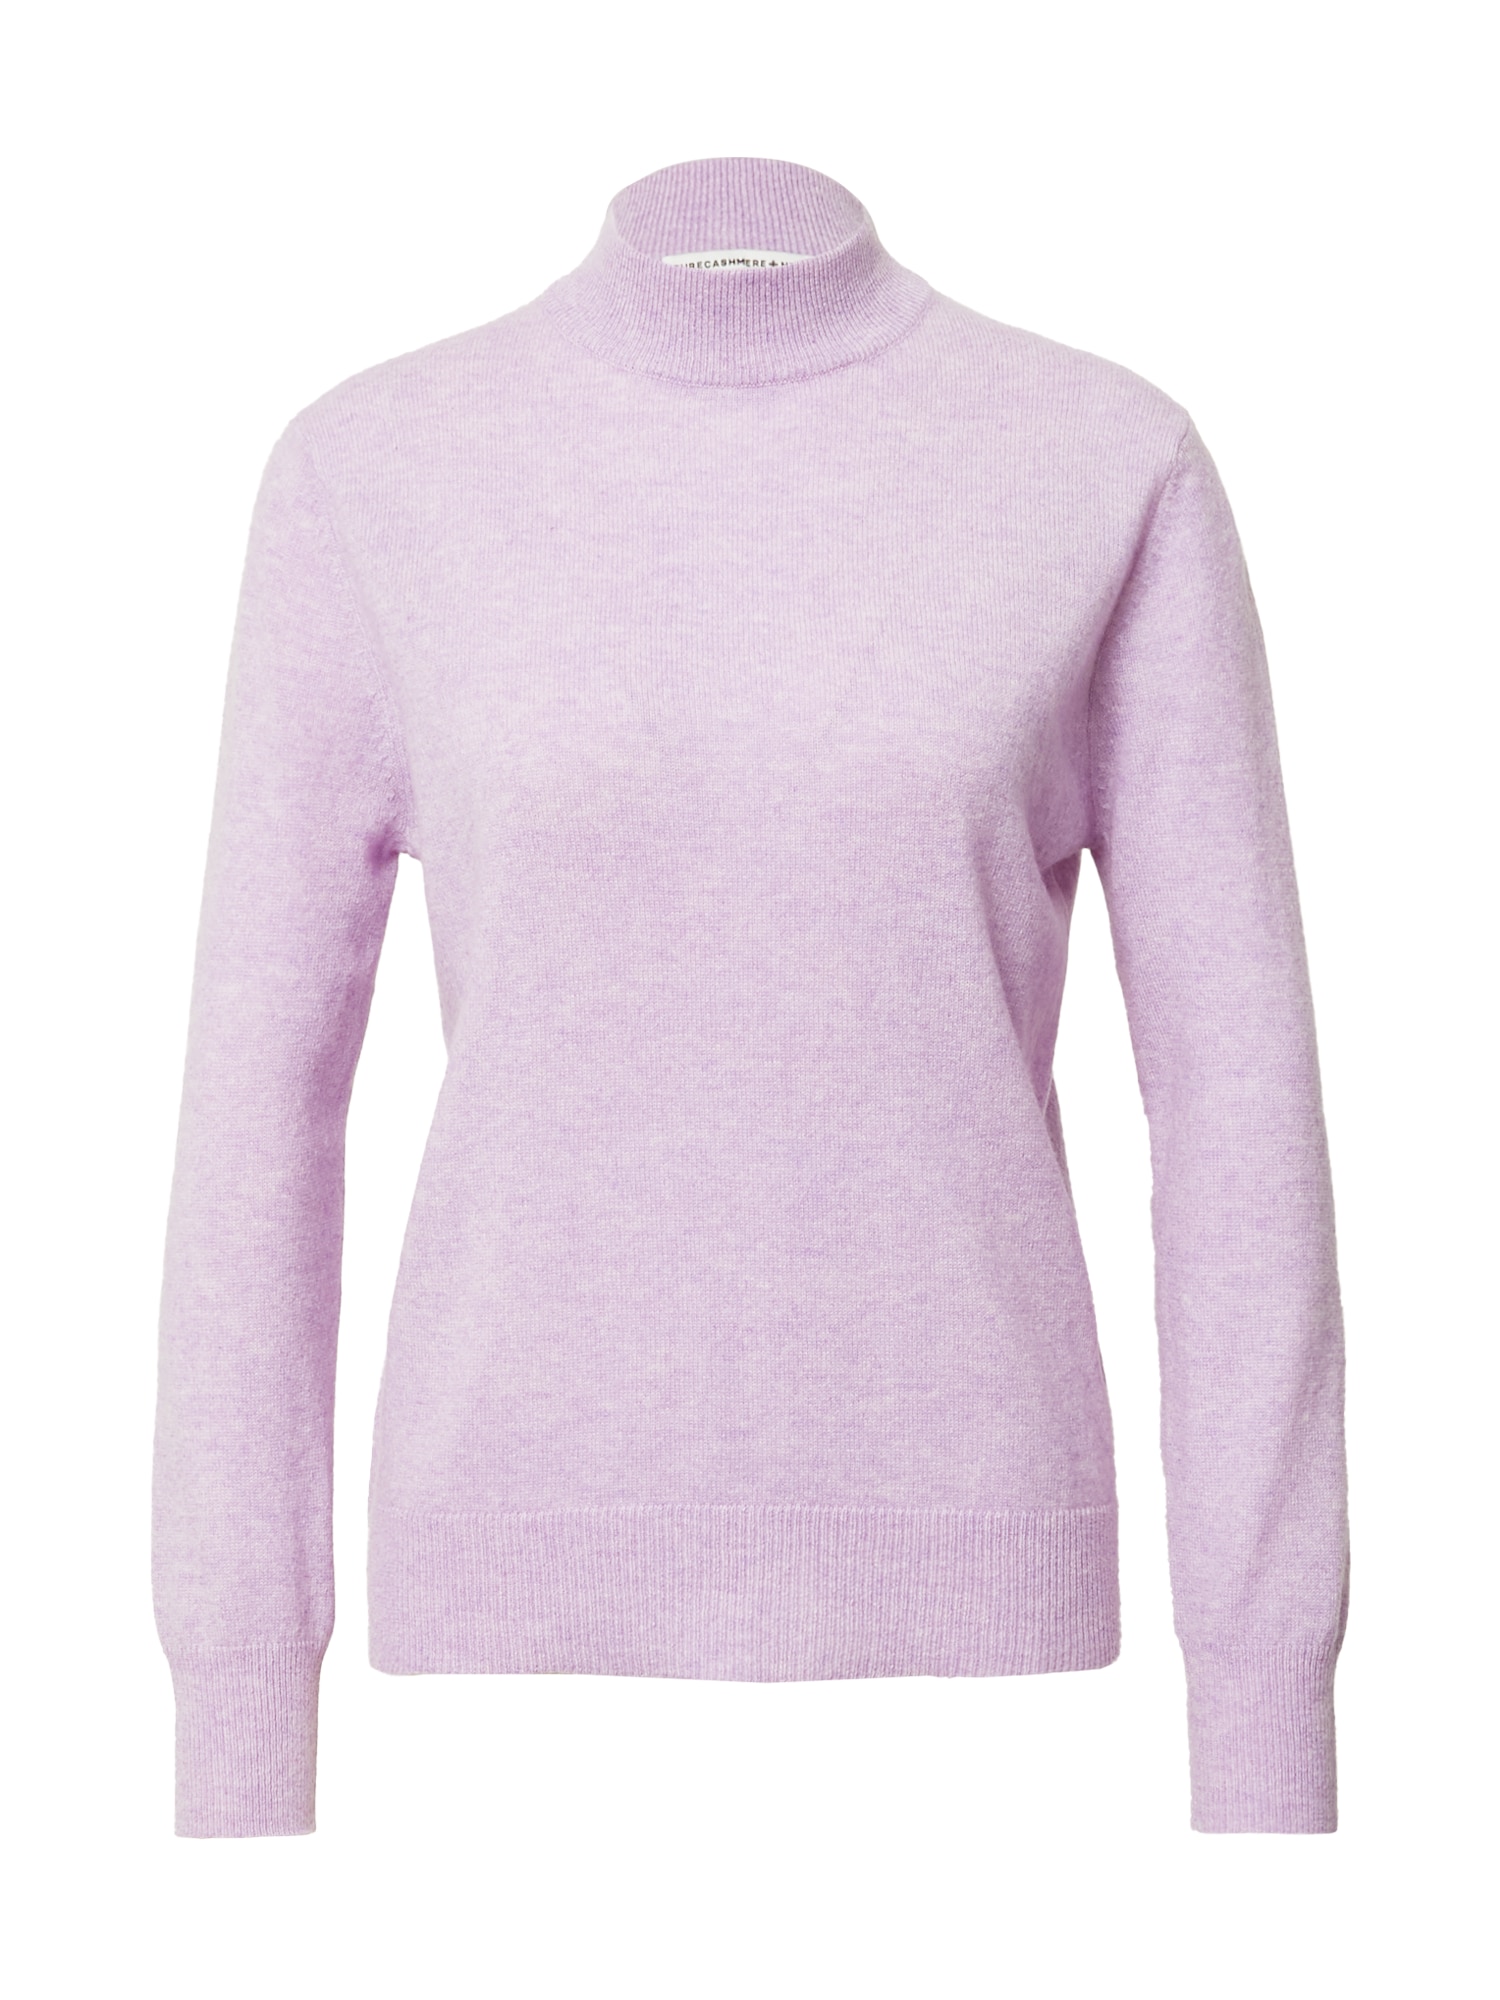 Pure Cashmere NYC Pulover  pastelno lila